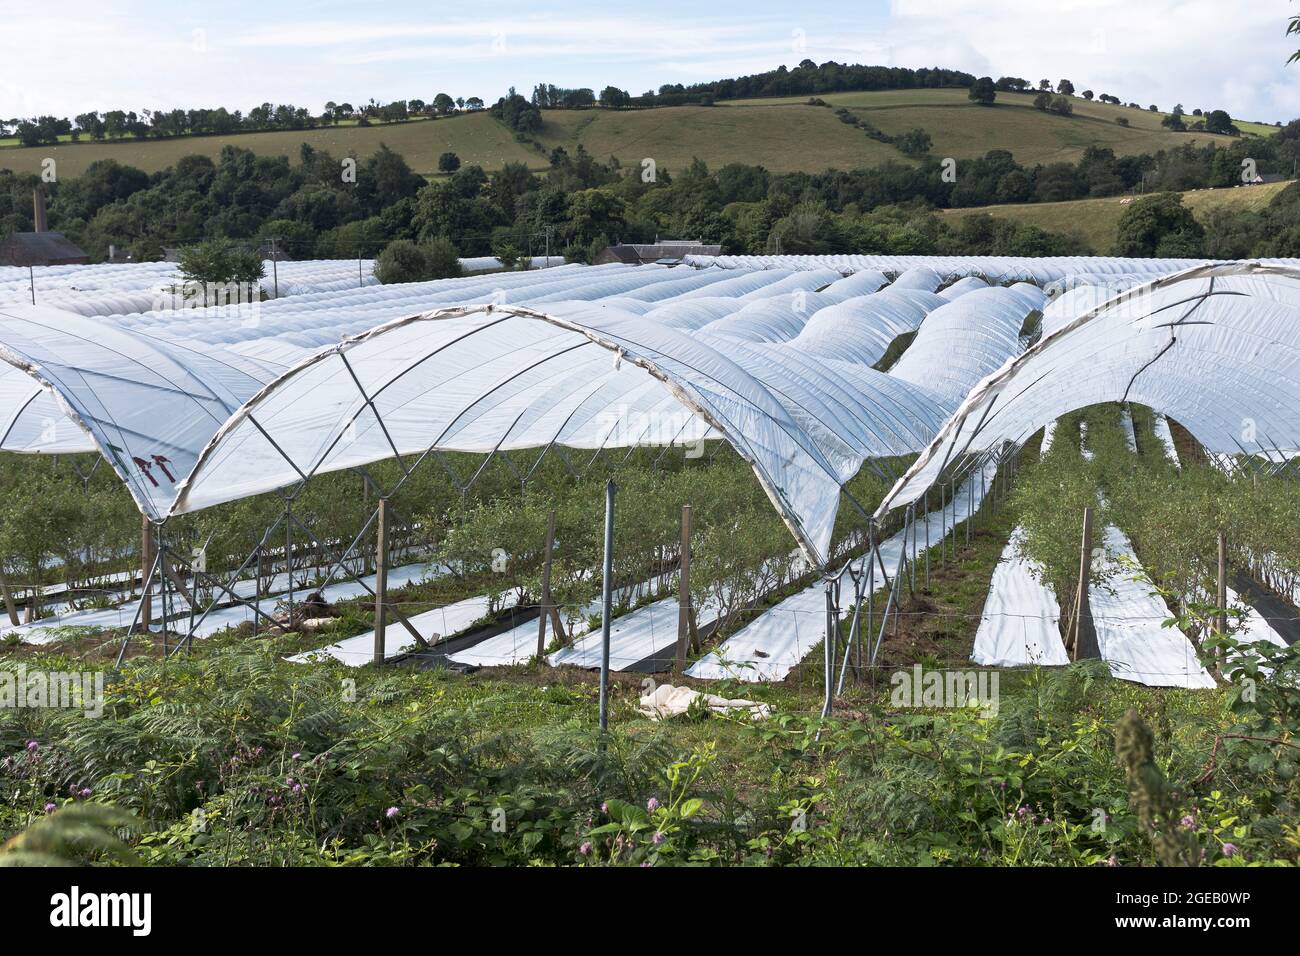 dh Fruit Farm BLAIRGOWRIE PERTHSHIRE Scottish fruits plastic poly tunnels Scotland polytunnels fields UK fruit farm production farms polytunnel crops Stock Photo